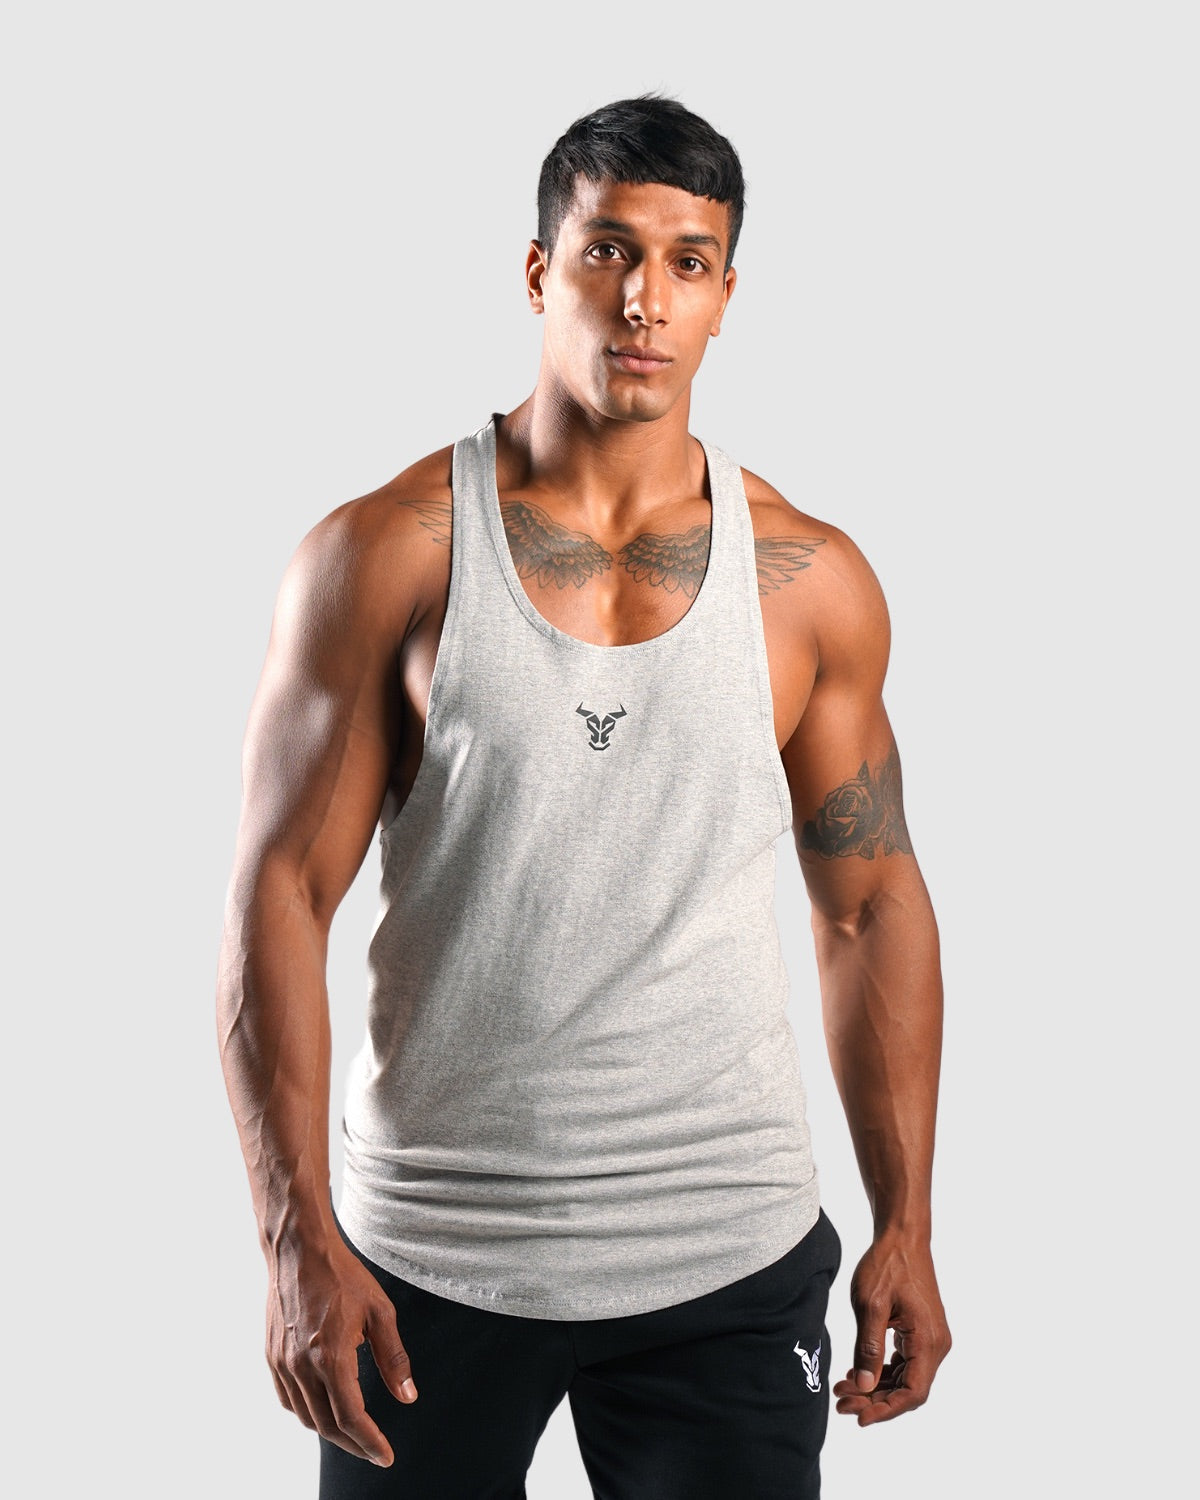 Men’s Gym wear and Workout Clothes